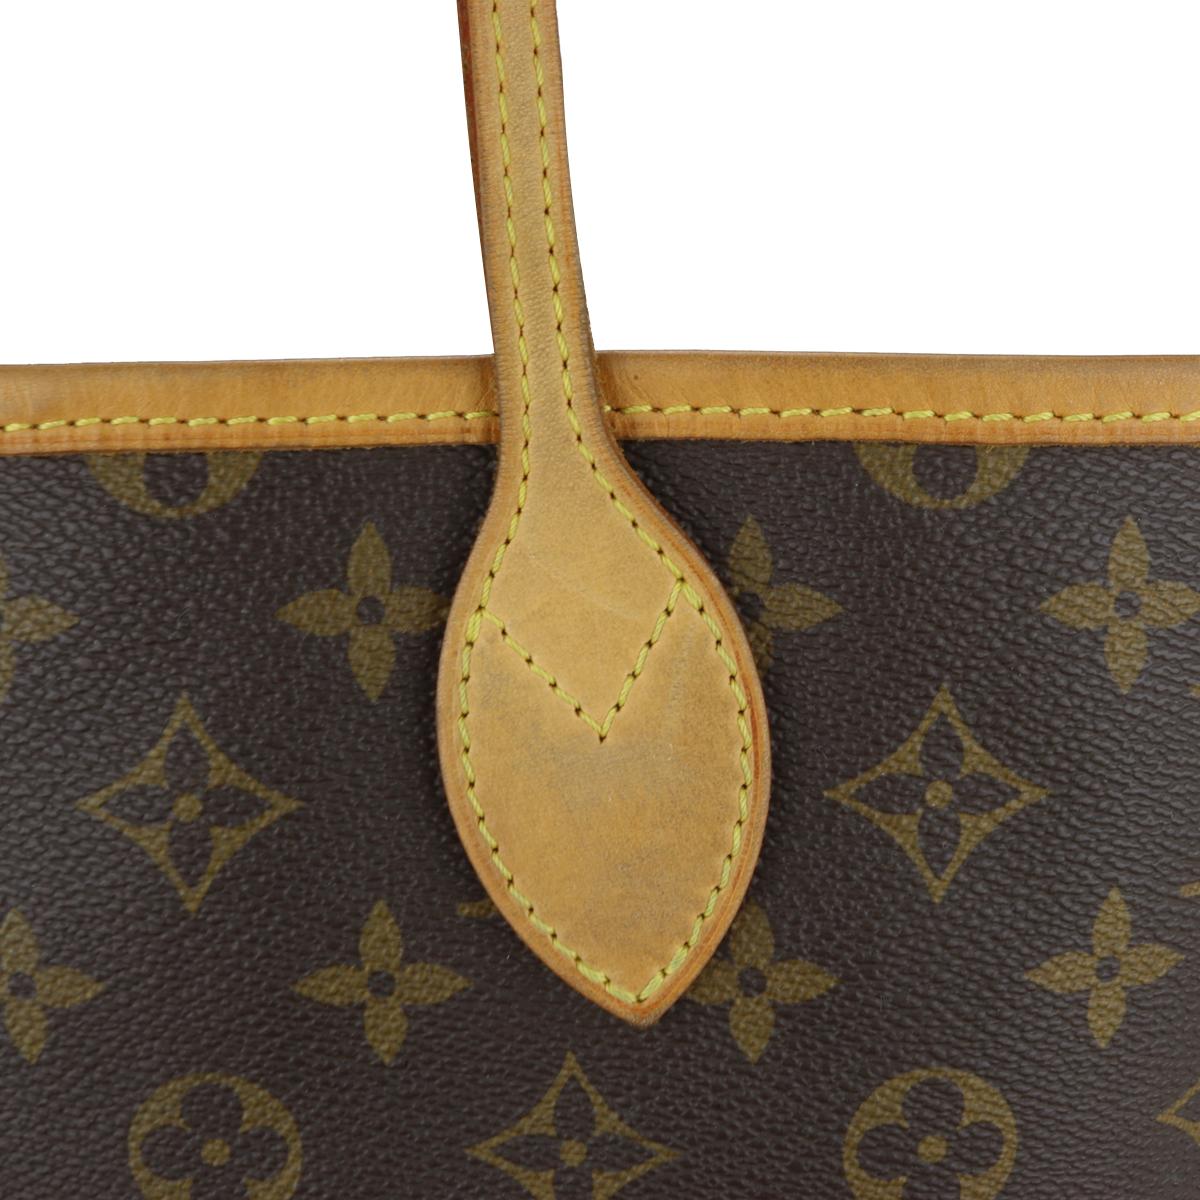 Louis Vuitton Neverfull GM Bag in Monogram with Beige Interior 2008 9